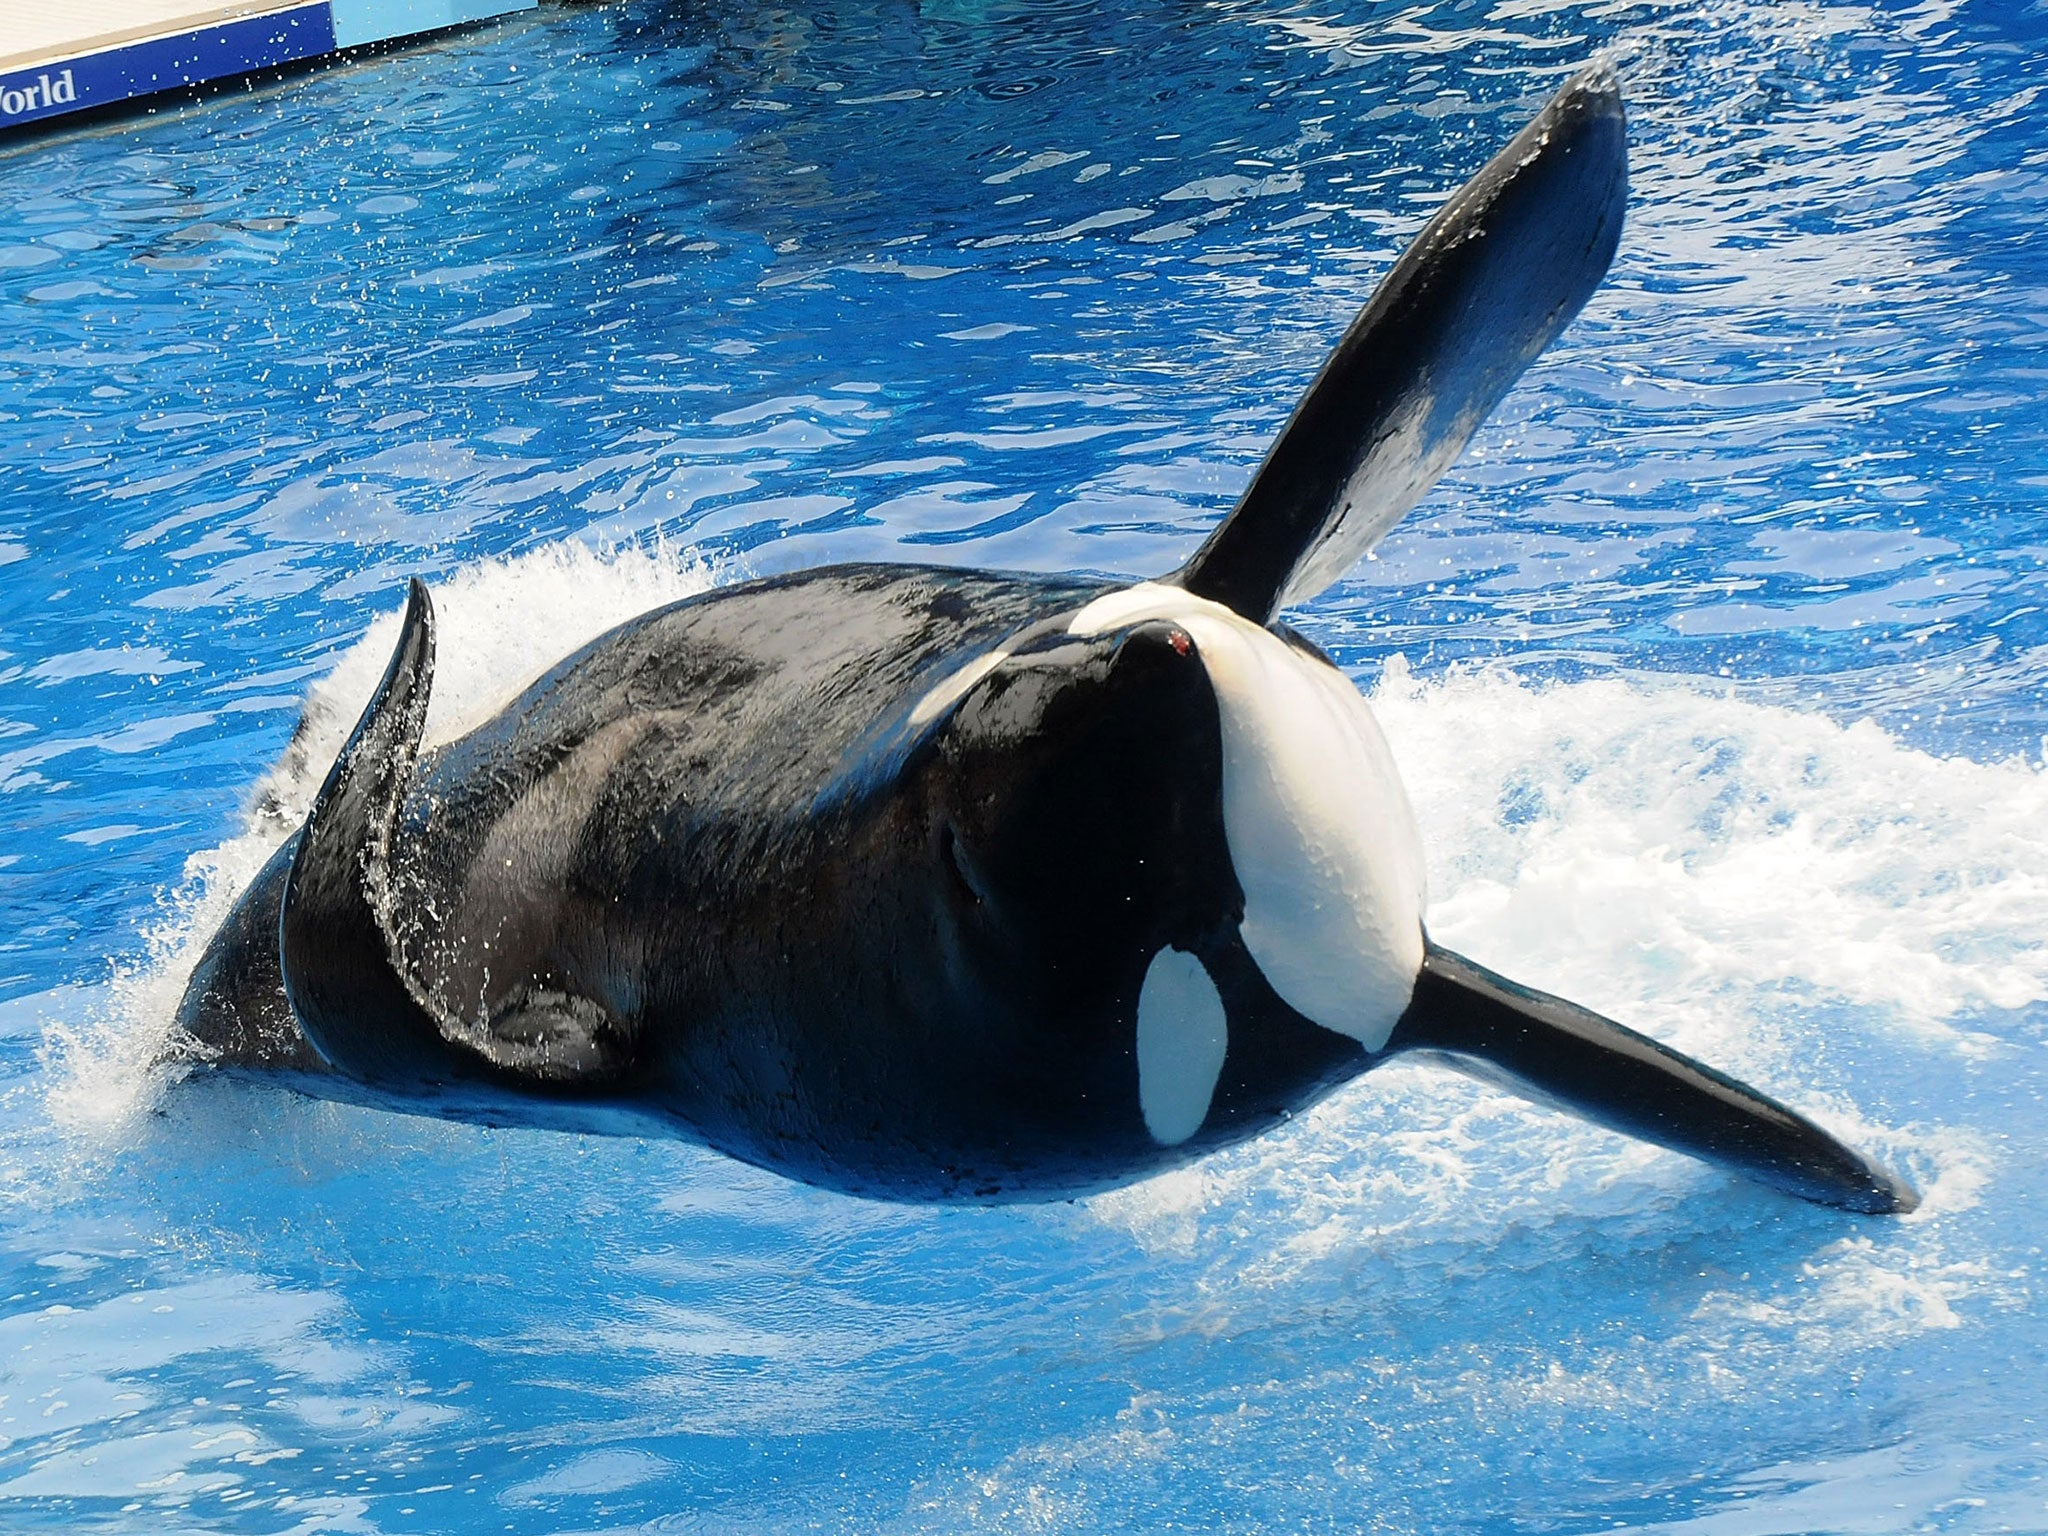 Tilikum the killer whale, died at Seaworld aged about 36